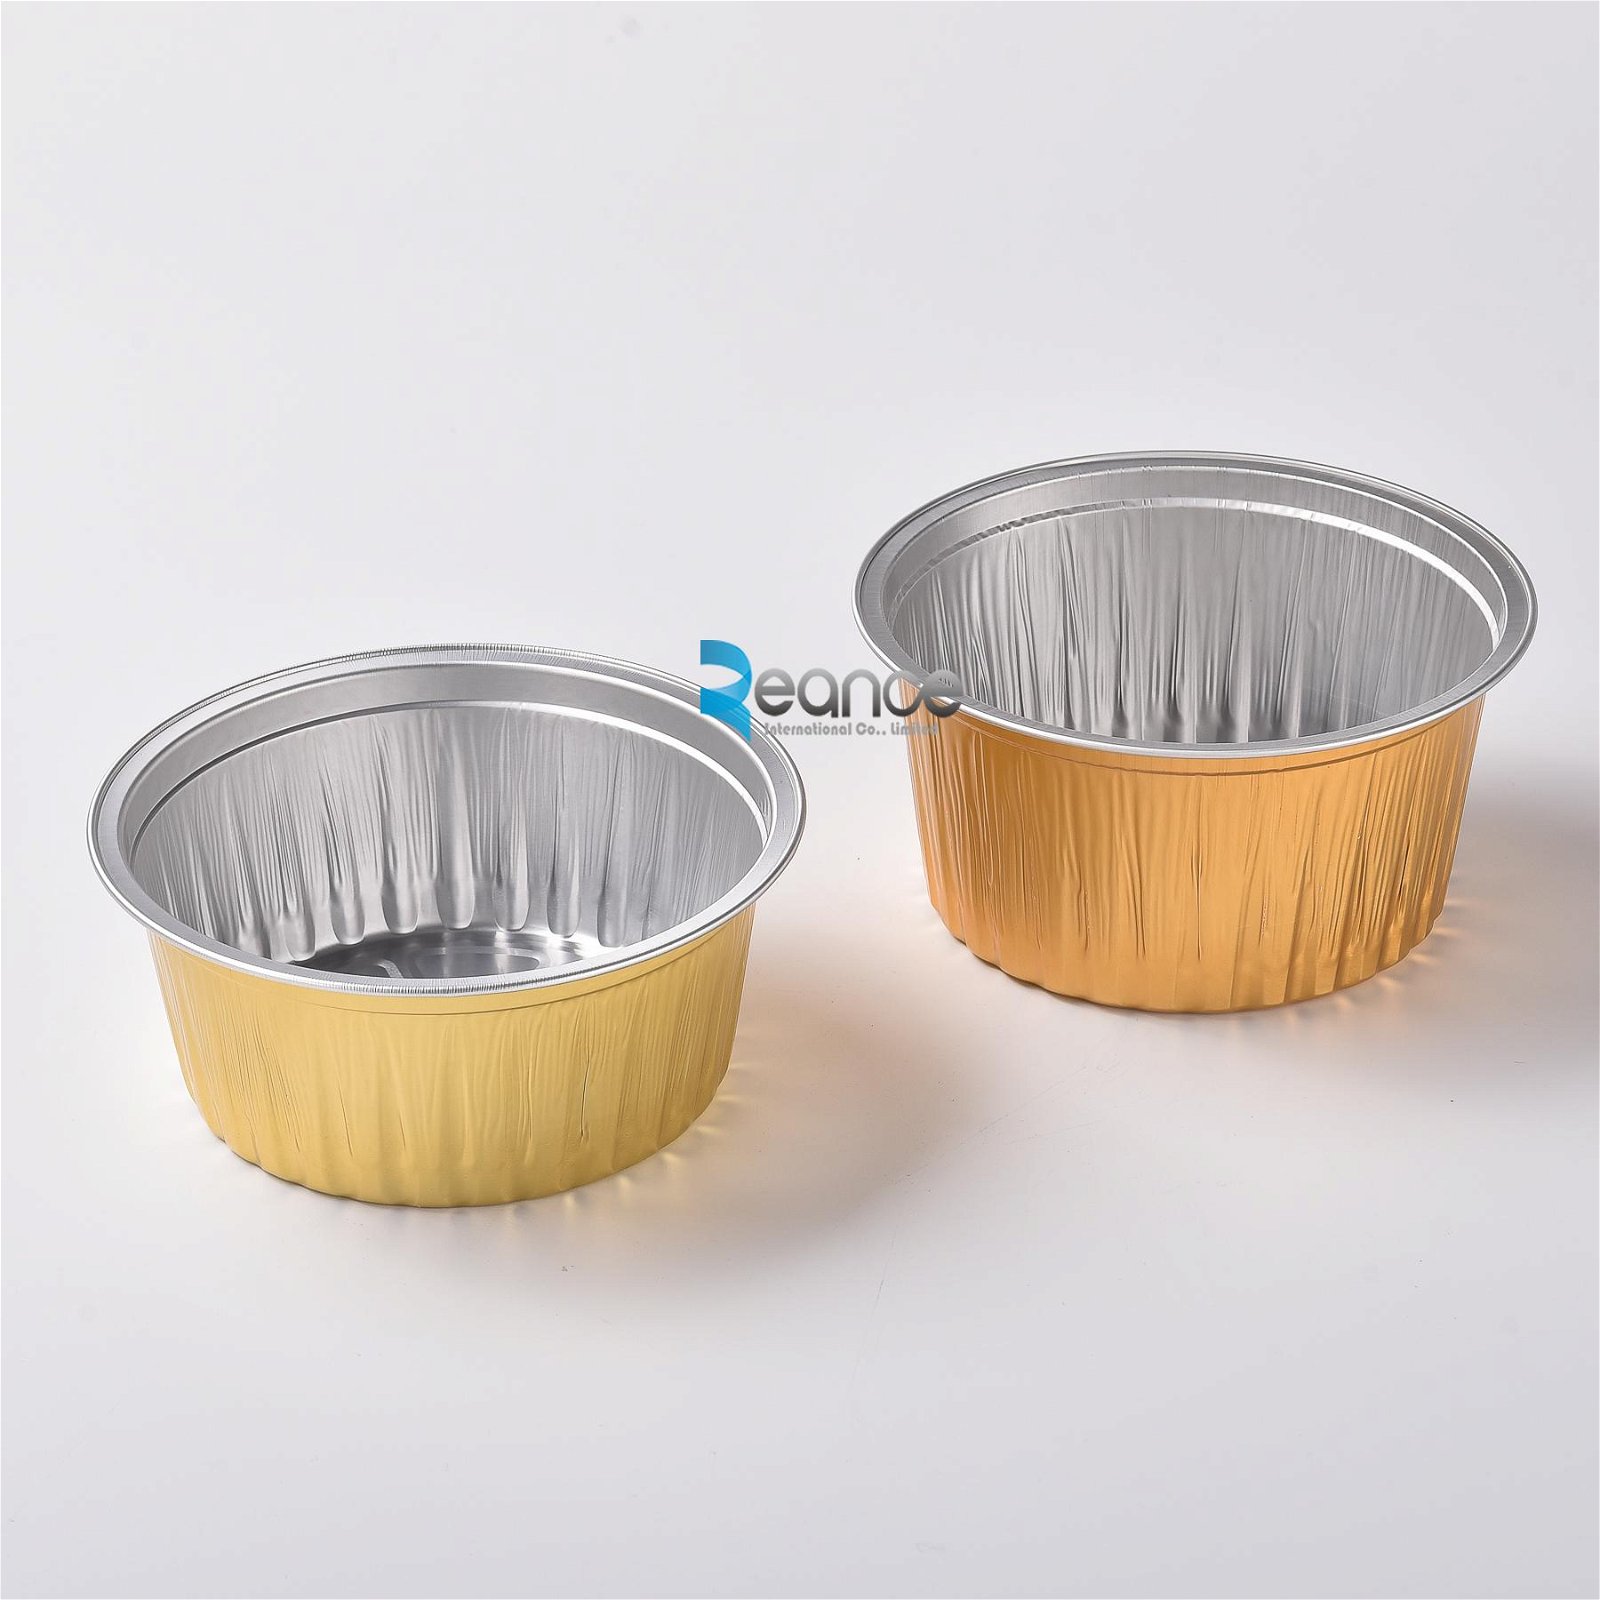 Small Round Aluminum Foil Containers for Cupcakes 4